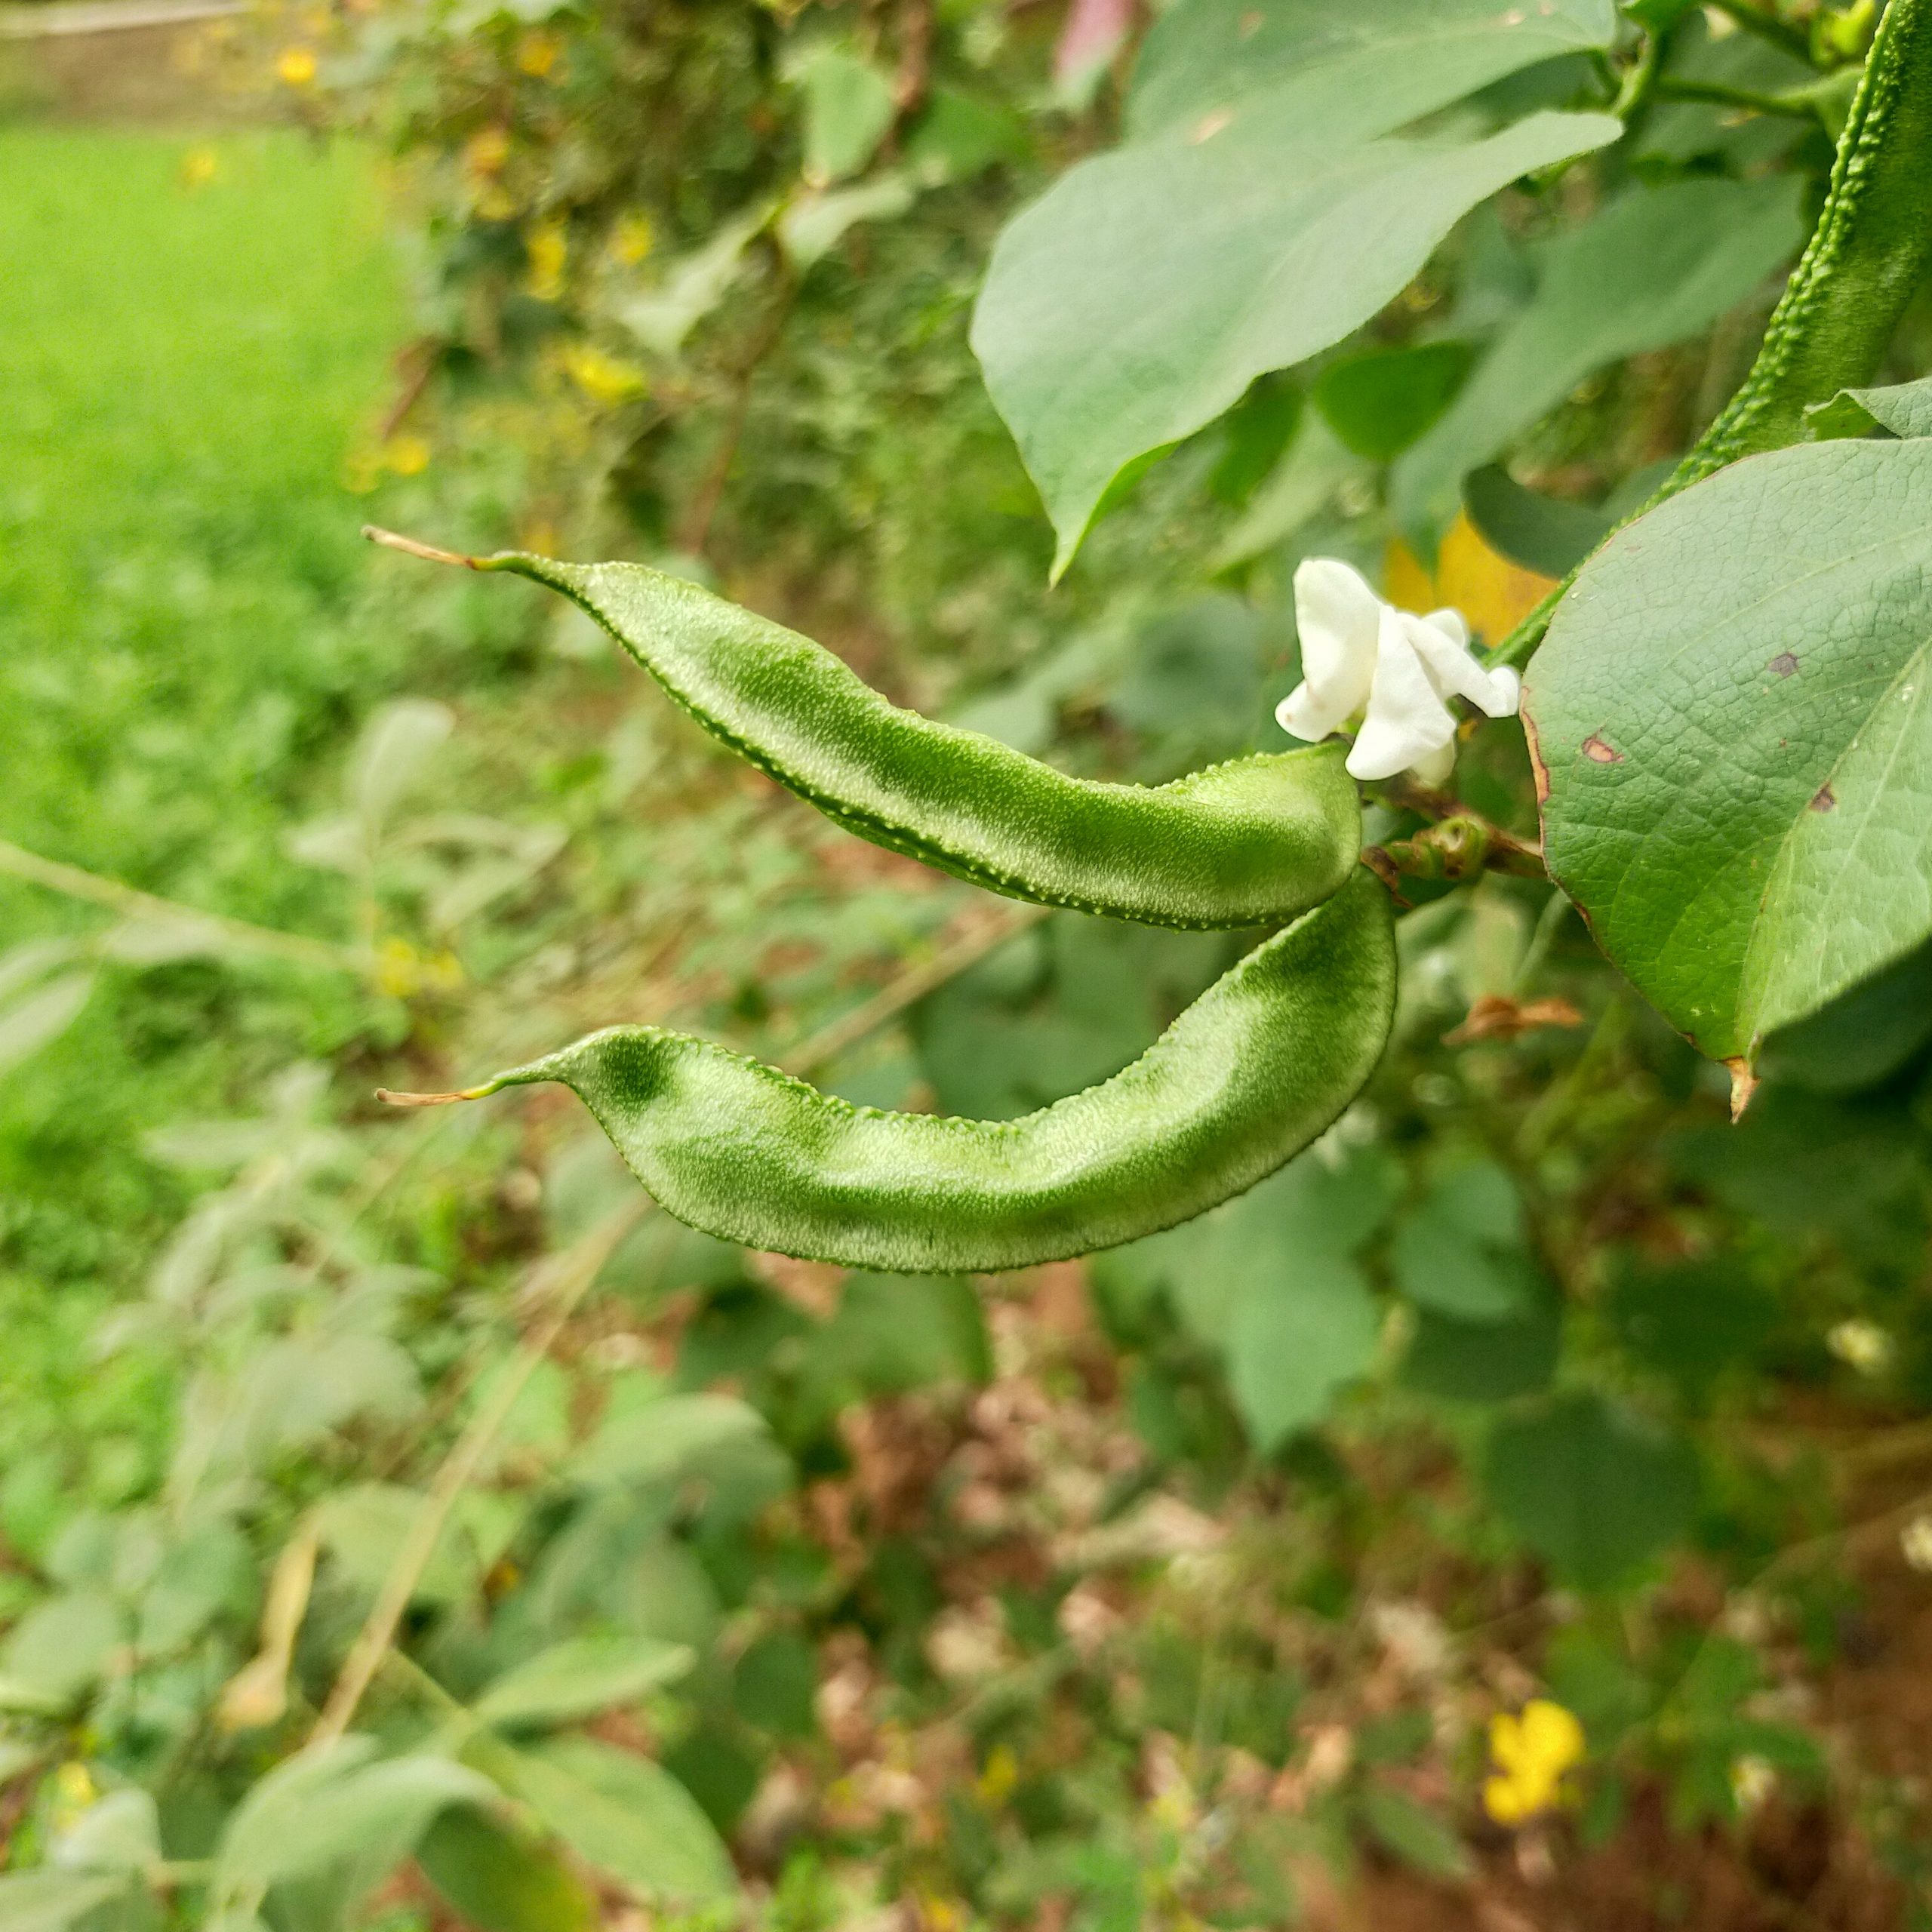 Beans on the plant